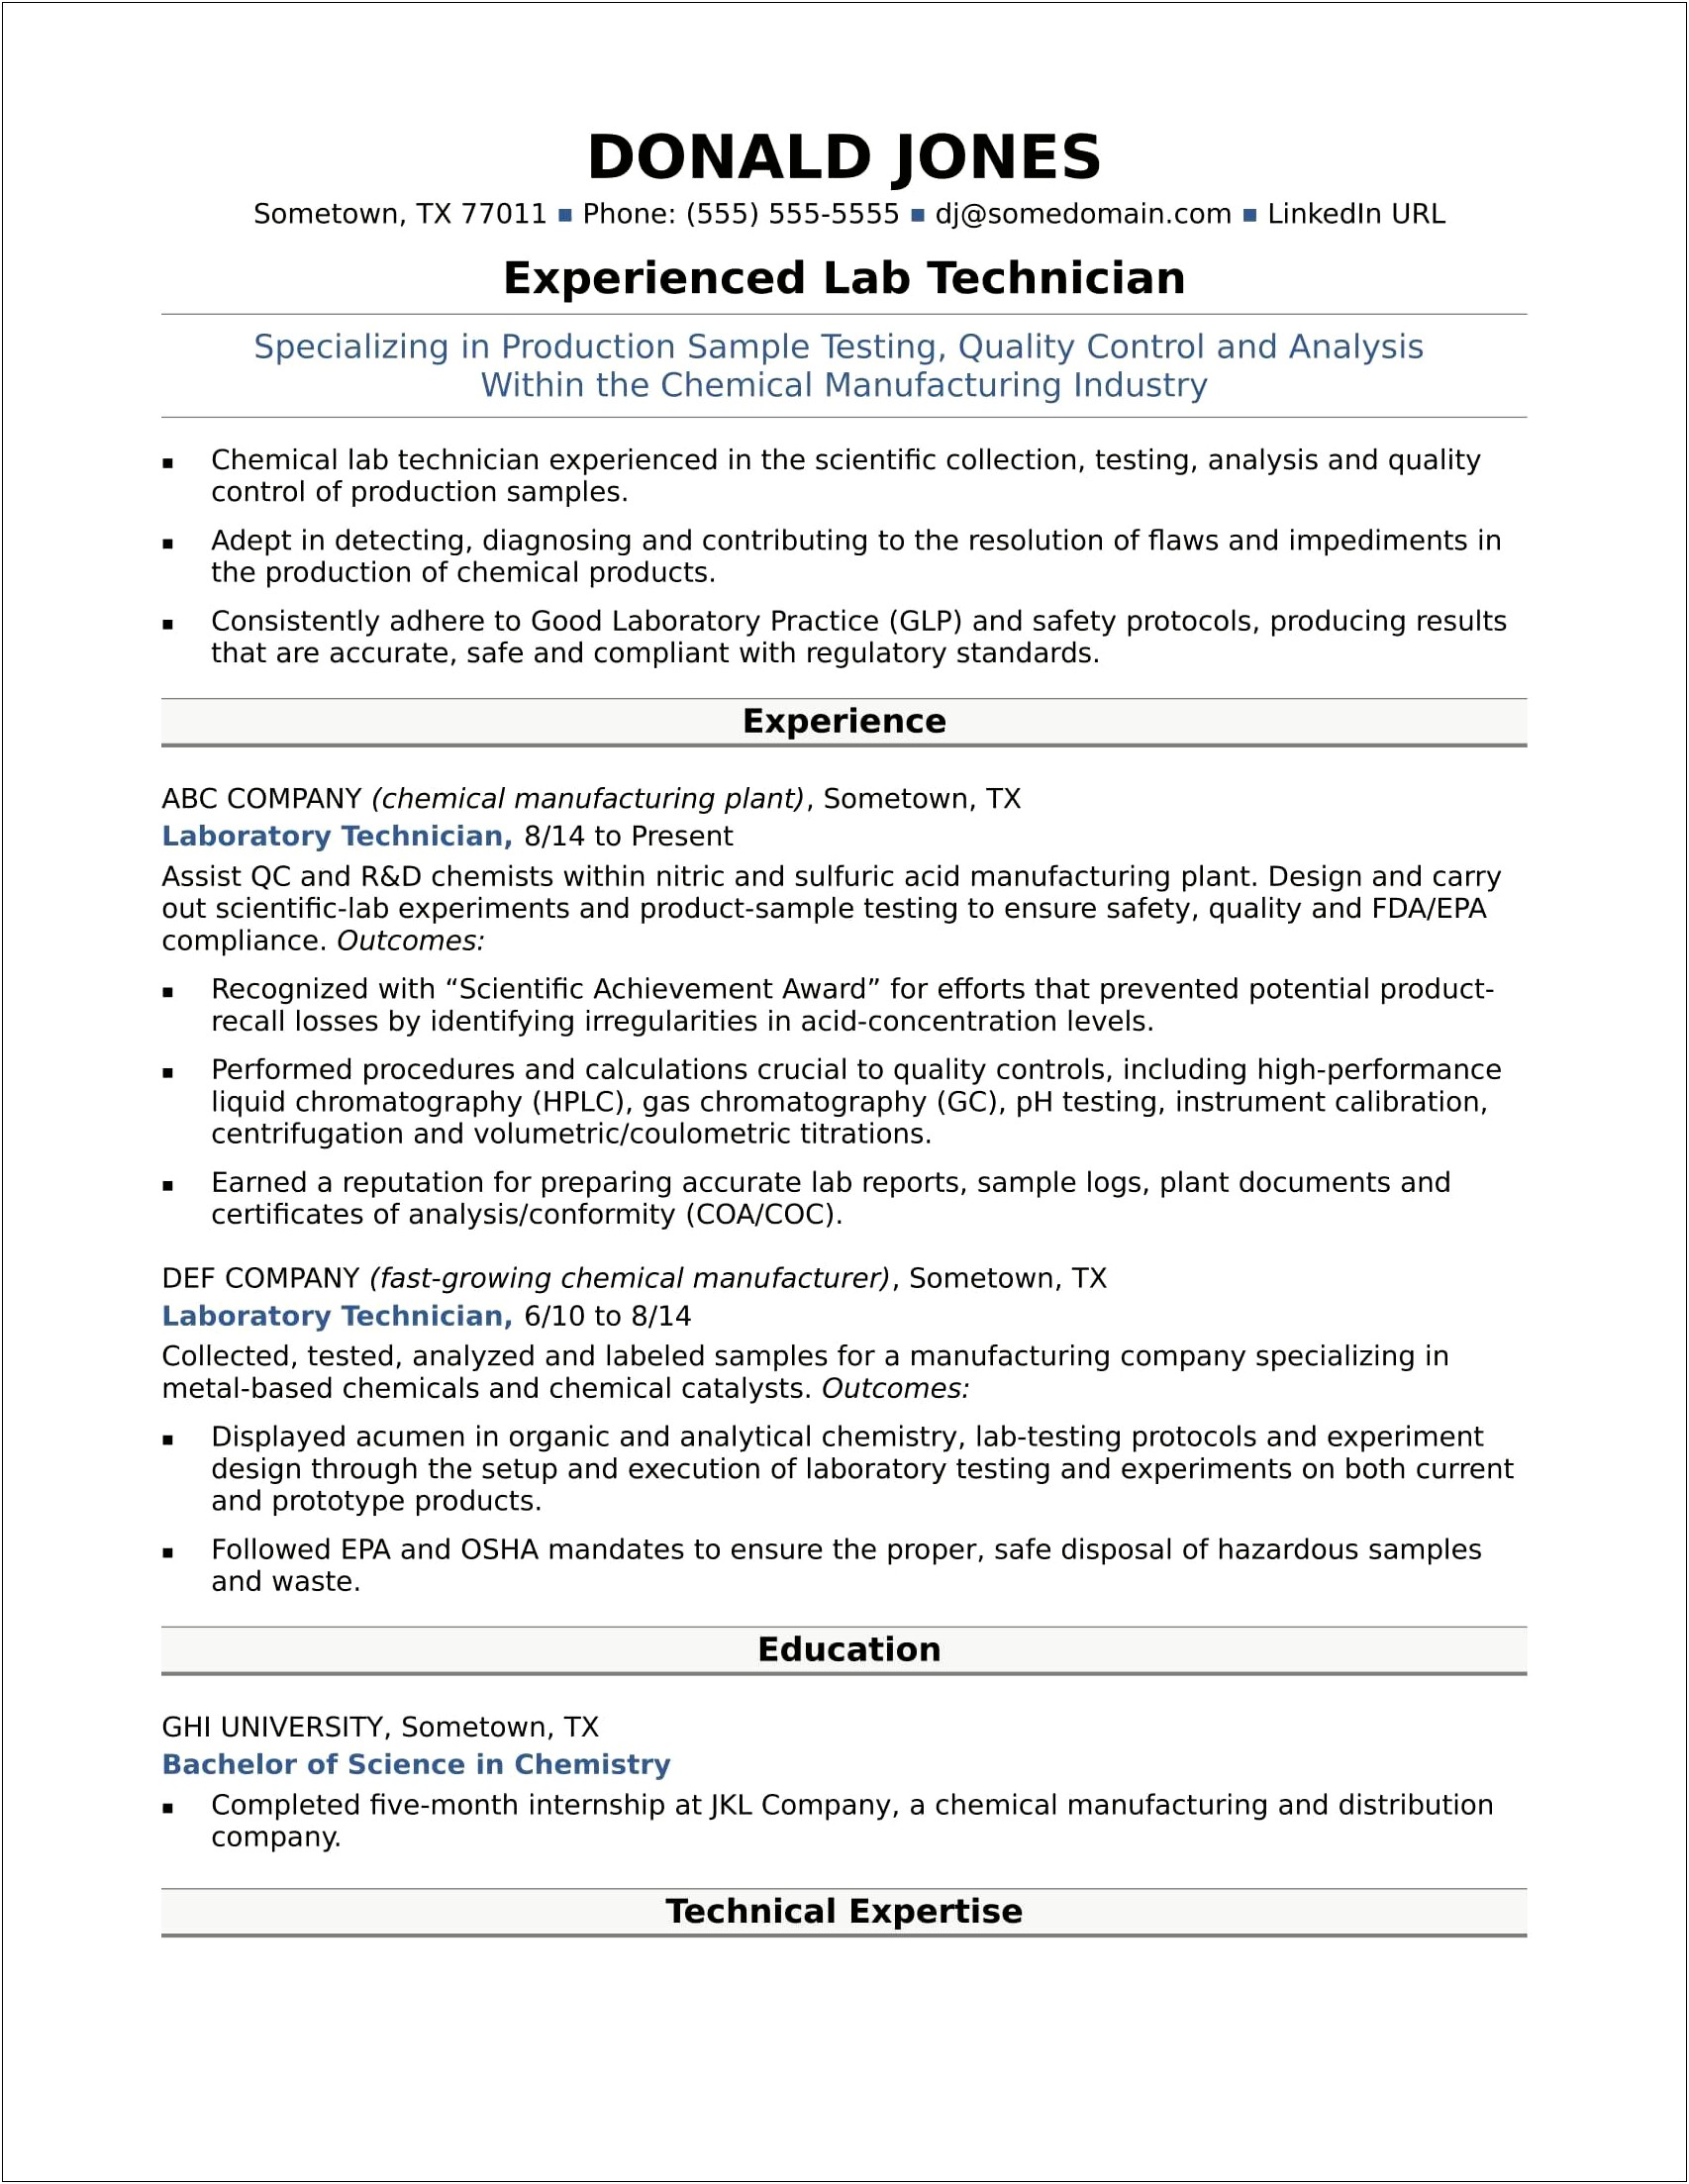 Resume Objective Statement For Medical Laboratory Tech